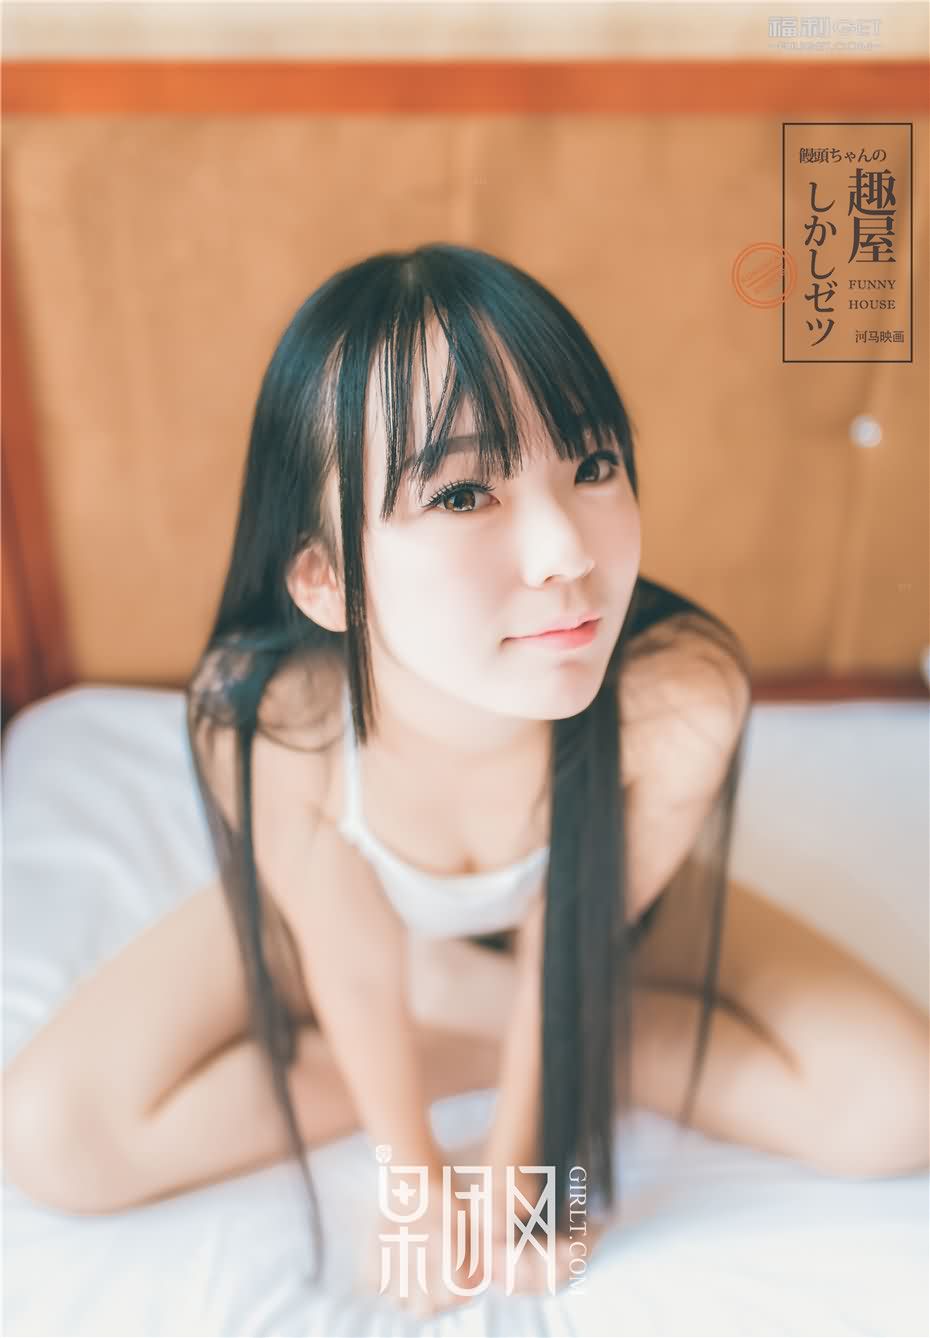 e0e28452229af52e70f87dd03c3a30c2 - [Girlt果团网] Vol.034 少女嫩模神似吉冈里帆  2017.07.15 [31P/190MB]